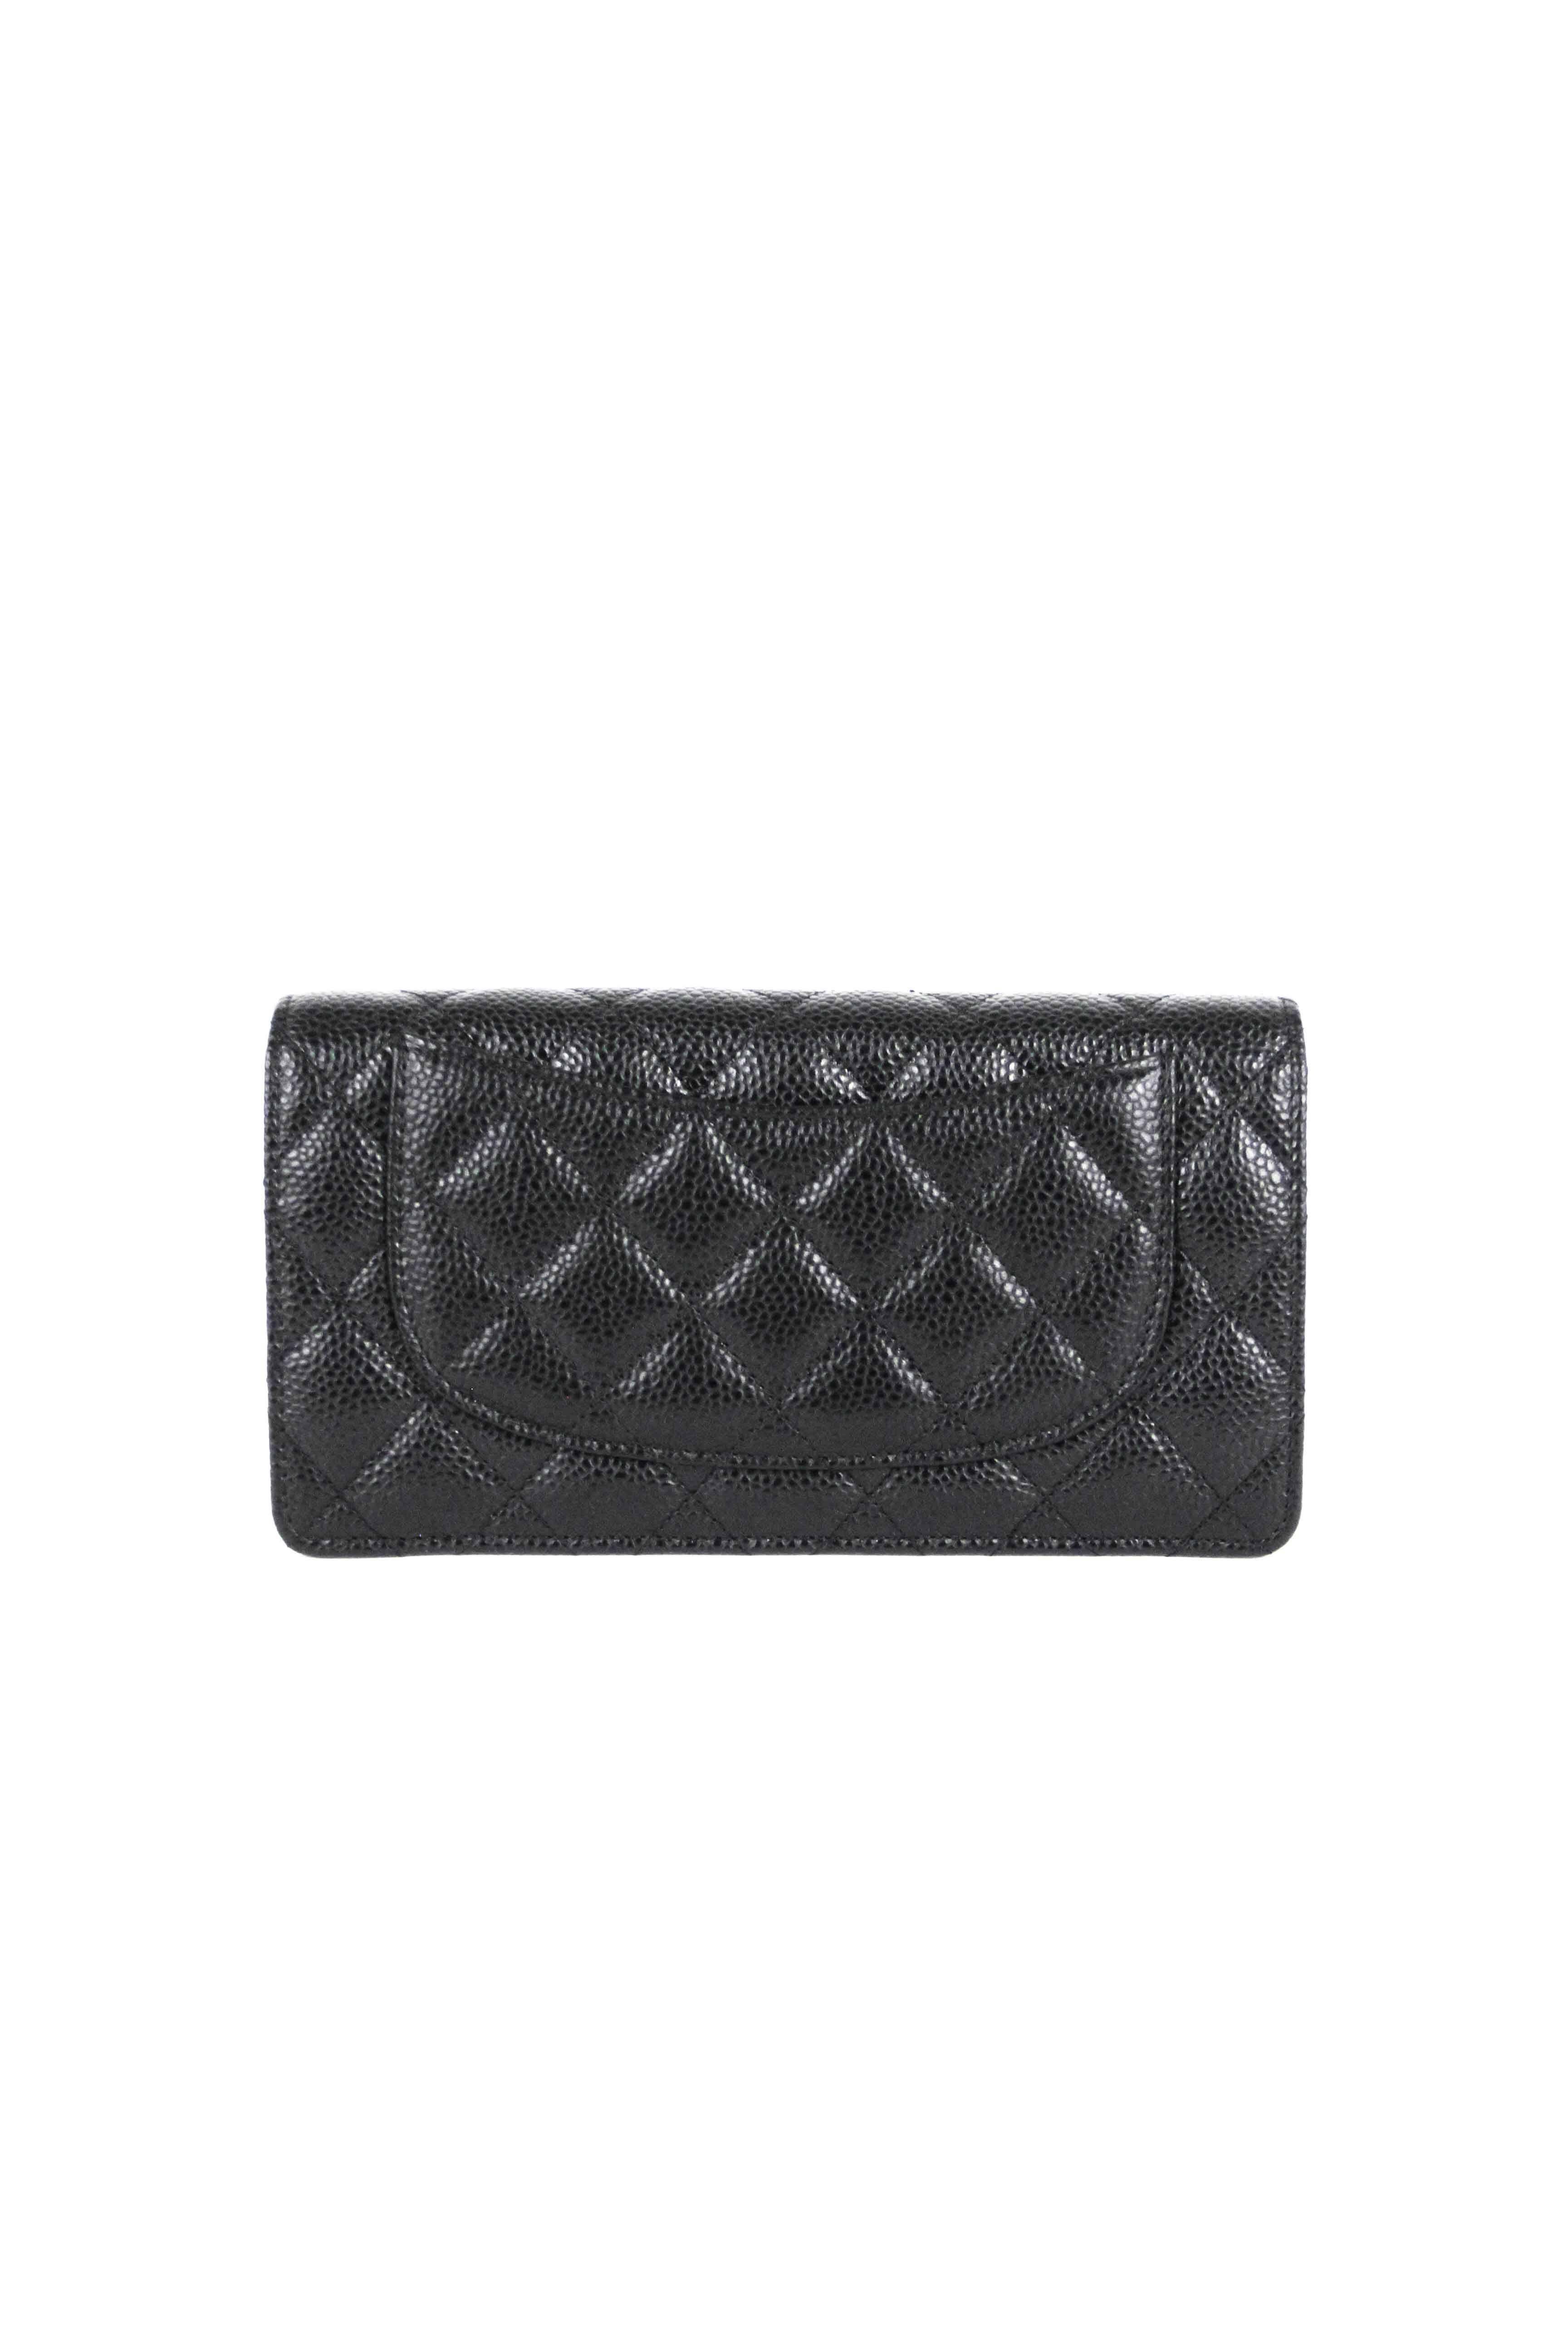 Chanel Quilted Caviar Long CC Wallet  6